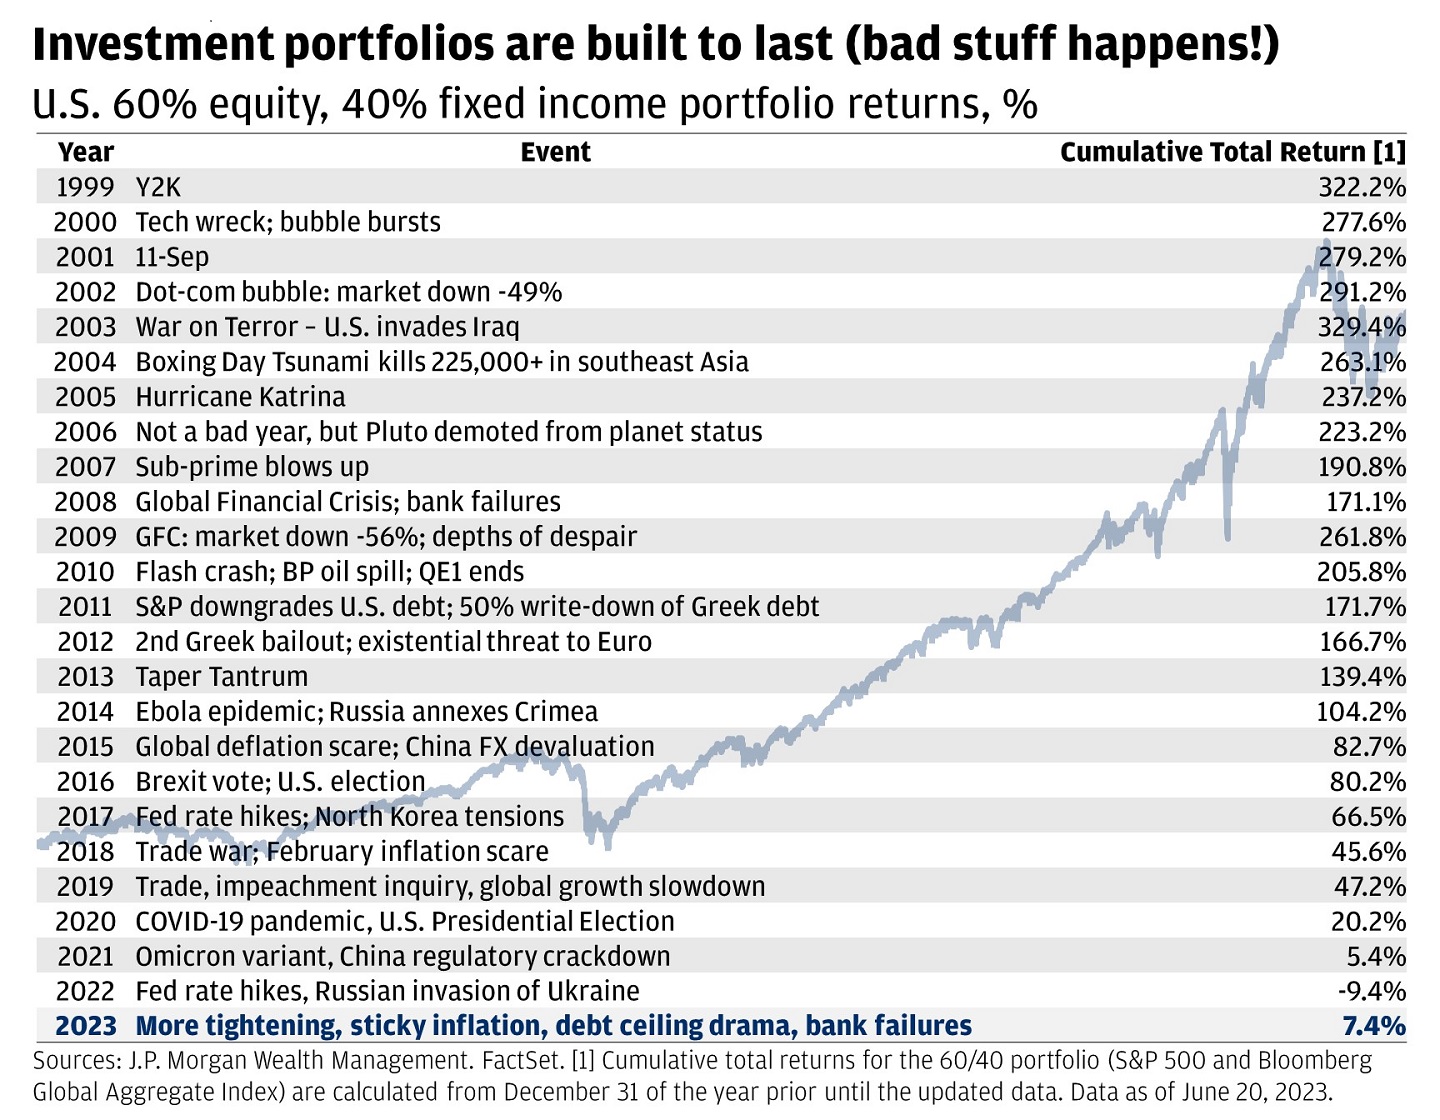 This chart shows the performance of a portfolio made up of 60% S&P 500 and 40% U.S